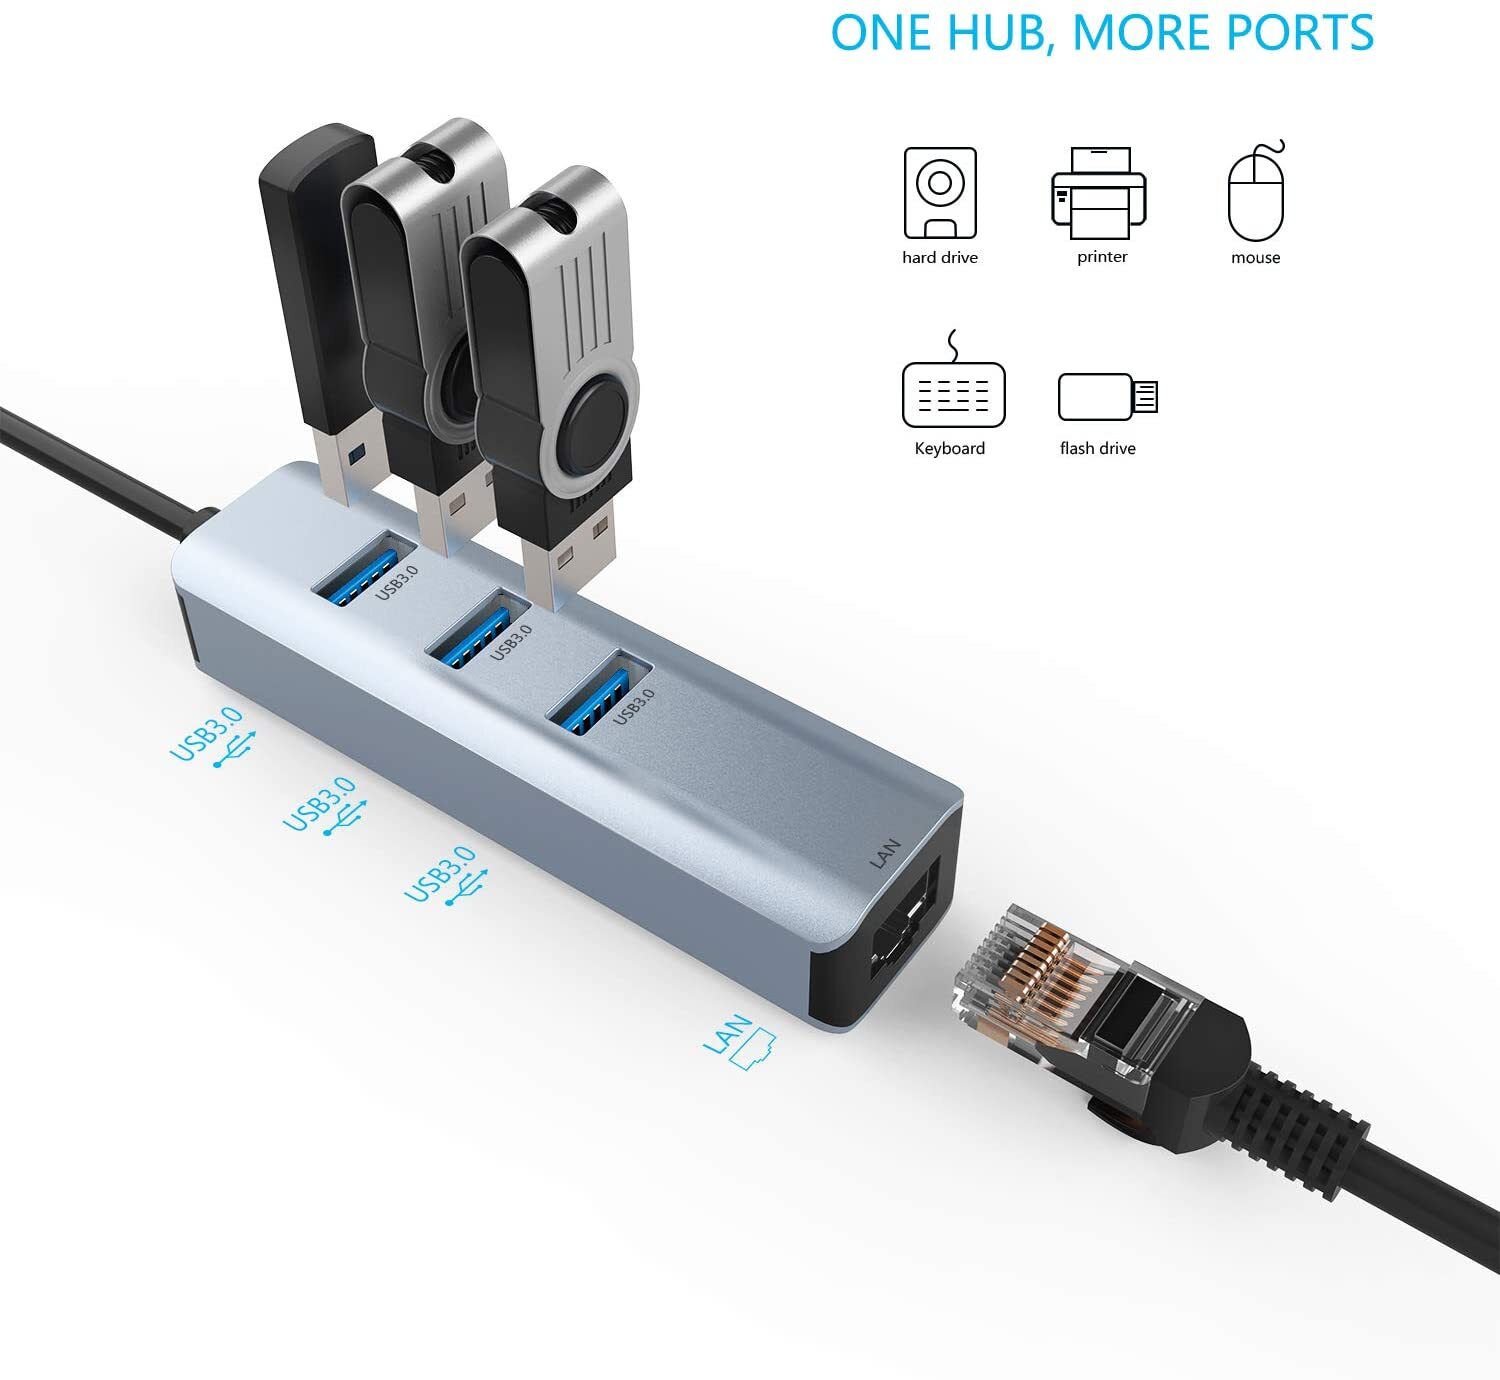 USB 3.0 to Ethernet Adapter,3-Port USB 3.0 Hub with RJ45 10/100/1000  Gigabit Ethernet Adapter Support Windows 10,8.1,Mac OS, Surface  Pro,Linux,Chromebook and More 